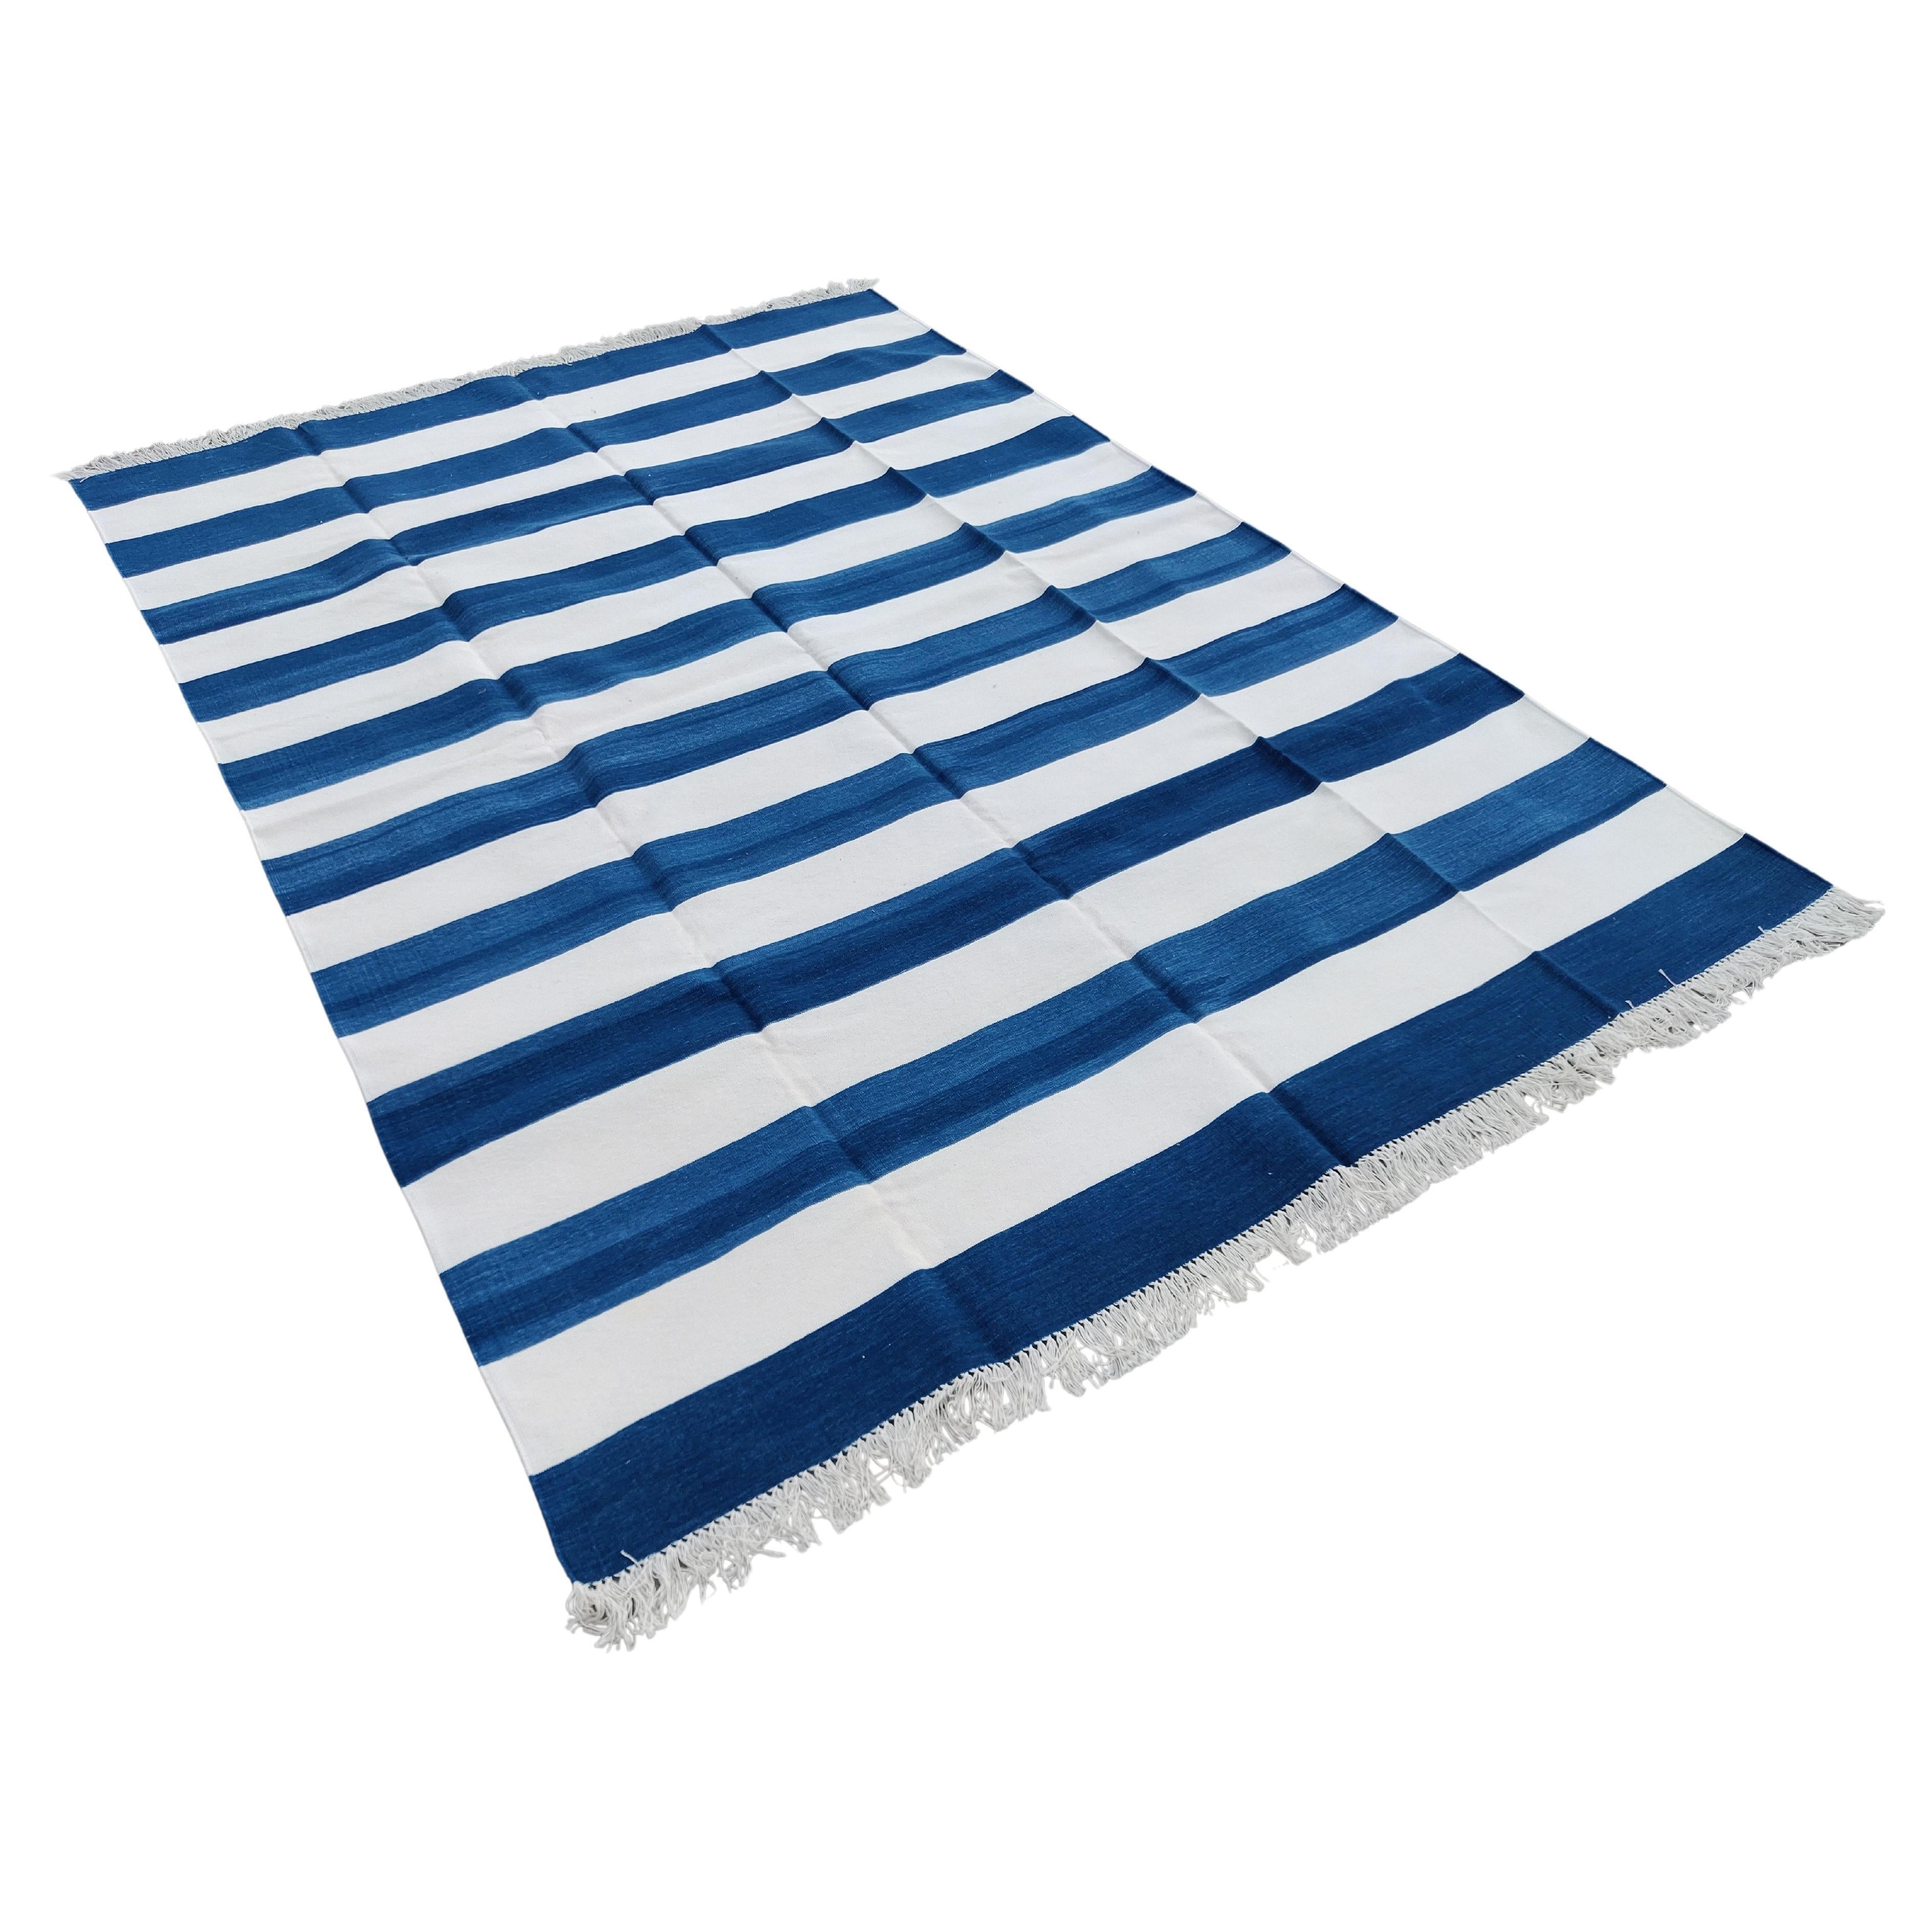 Handmade Cotton Area Flat Weave Rug, 6x9 Blue And White Striped Indian Dhurrie For Sale